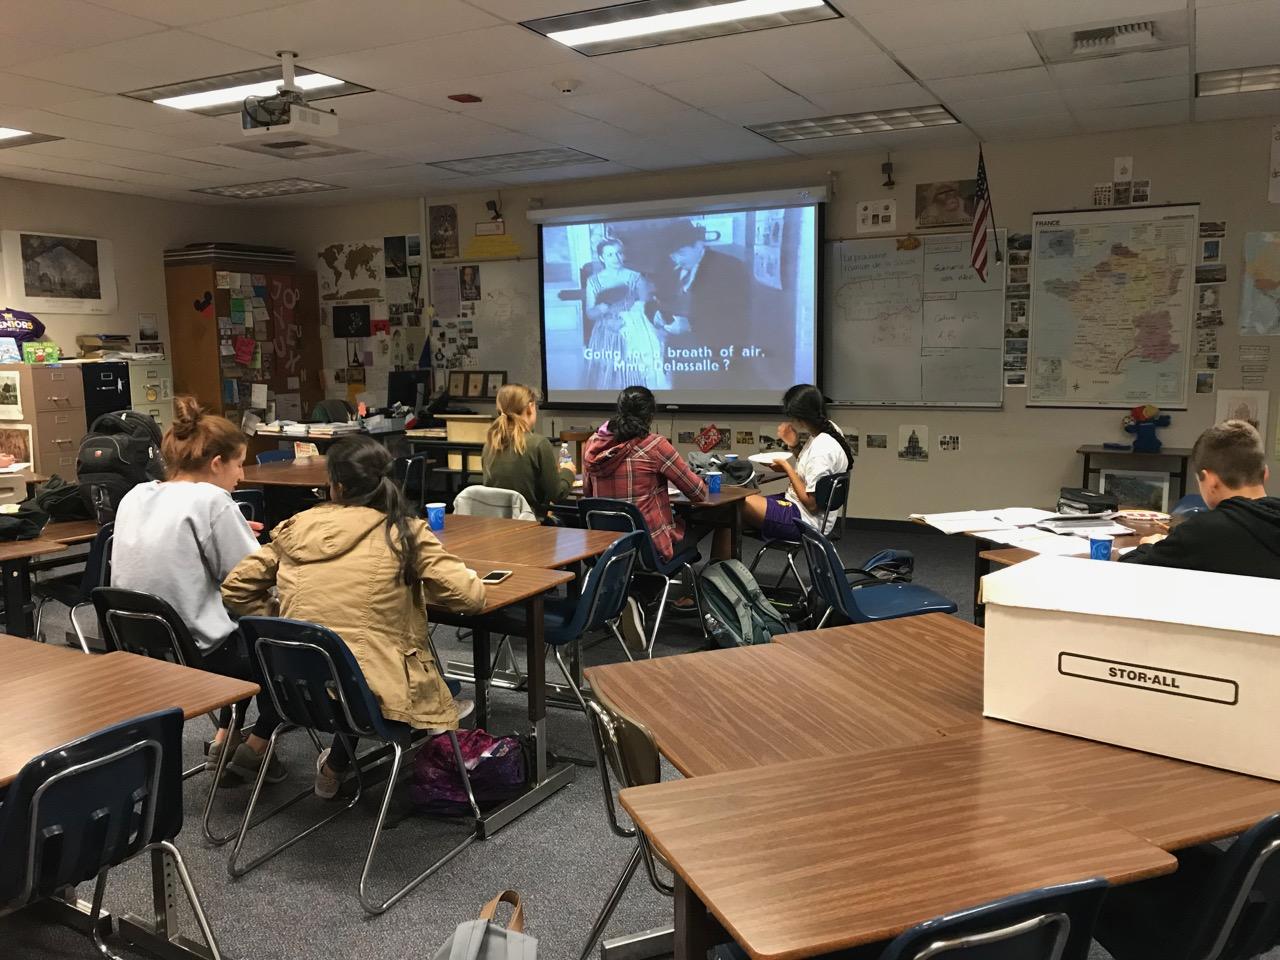 Students try cheese as they watch "La Diabolique." In keeping with Halloween, which had just passed day before, the movie was a black-and-white horror film.